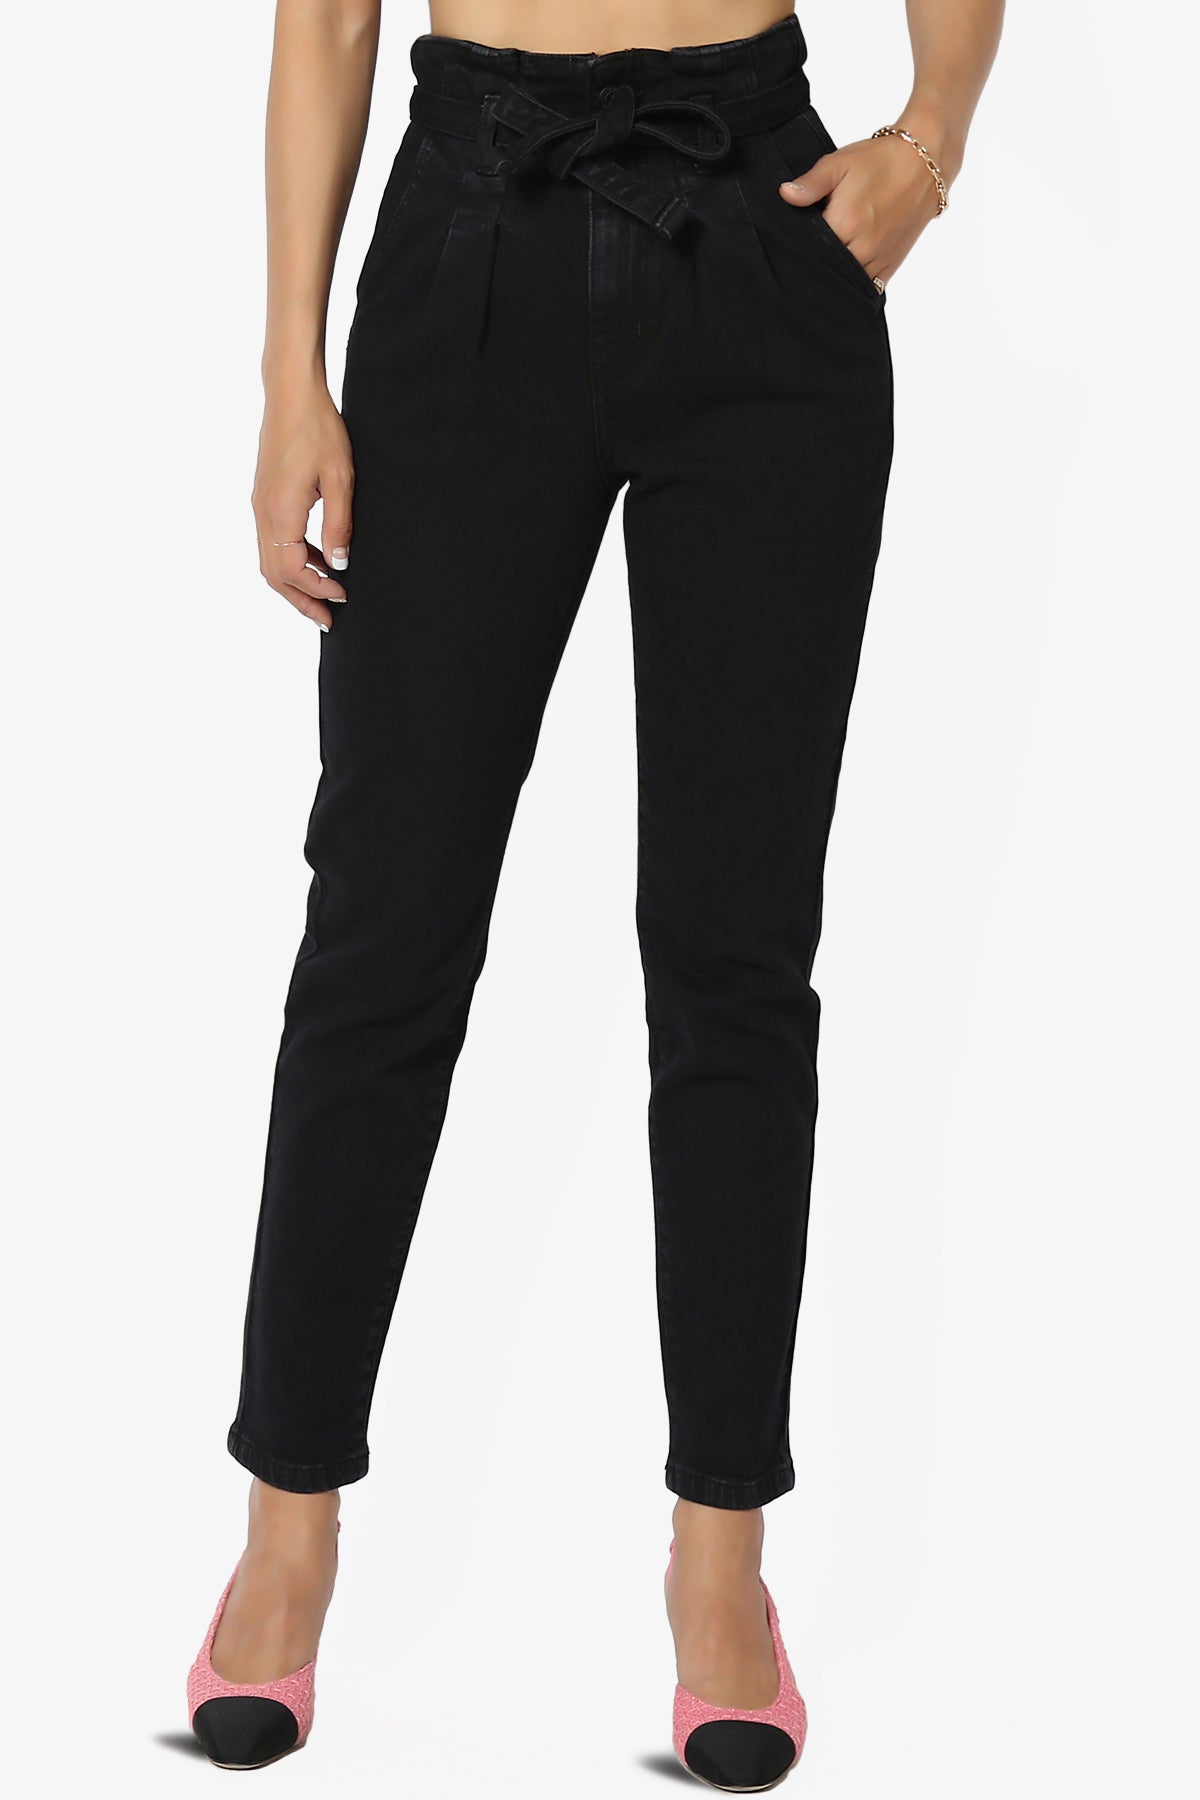 Tedi Paperbag High Waisted Mom Jeans in Black